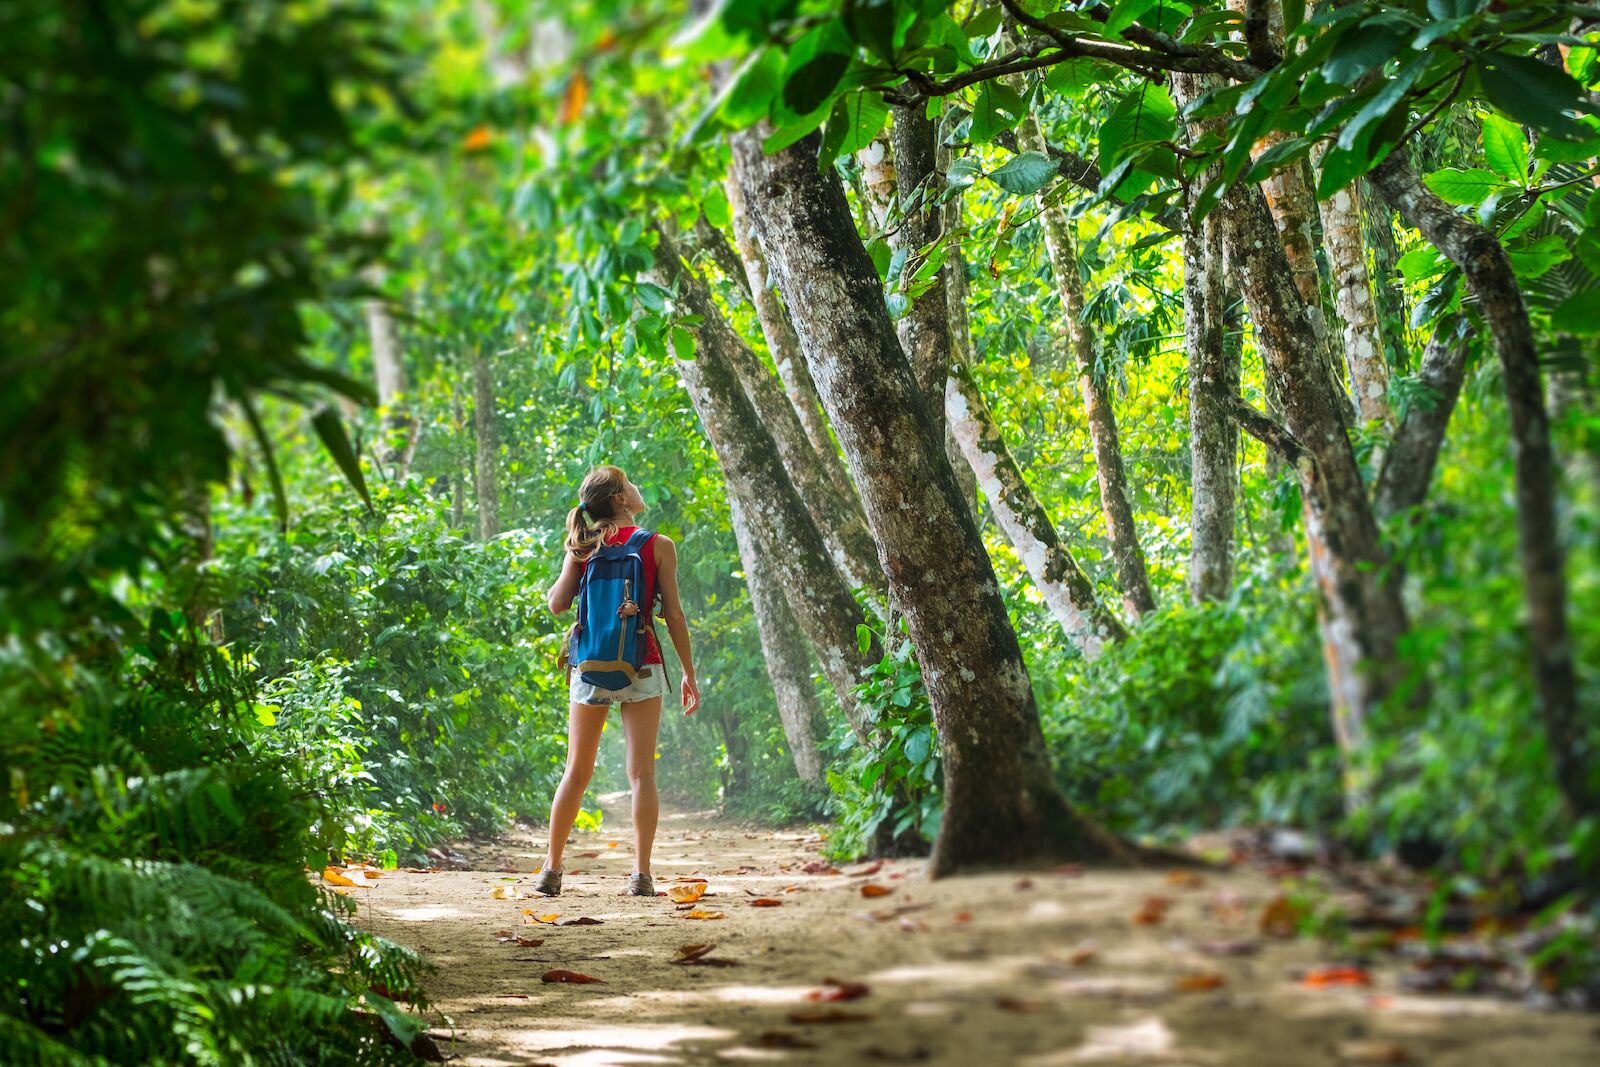 Costa Rica Just Made It Ridiculously Easy To Live There as a Digital Nomad